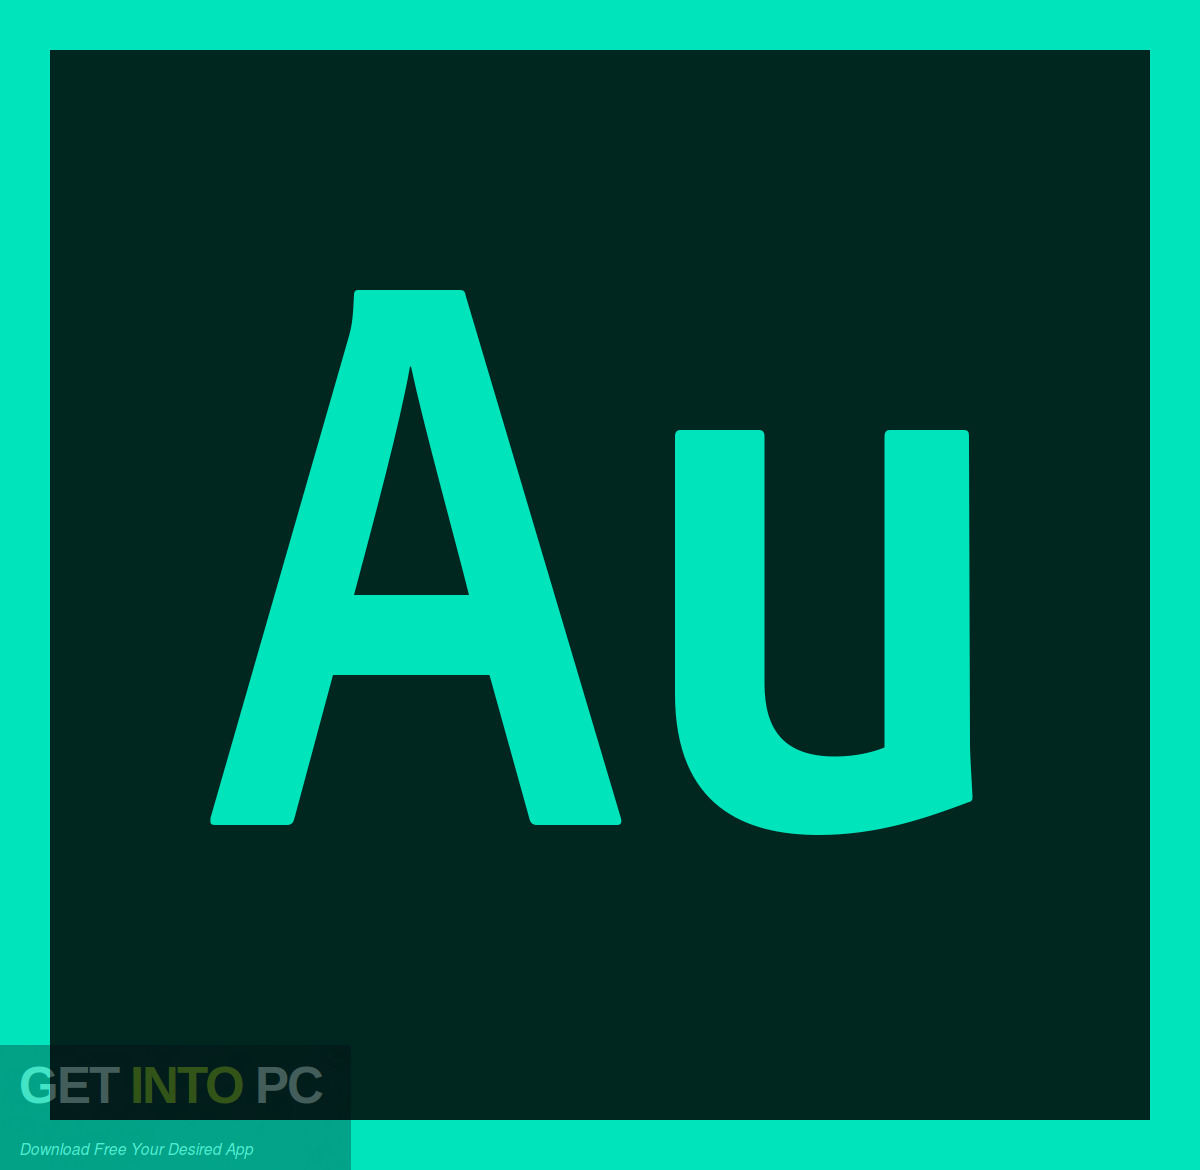 Adobe audition software free download for windows 7 18 puranas in malayalam pdf free download